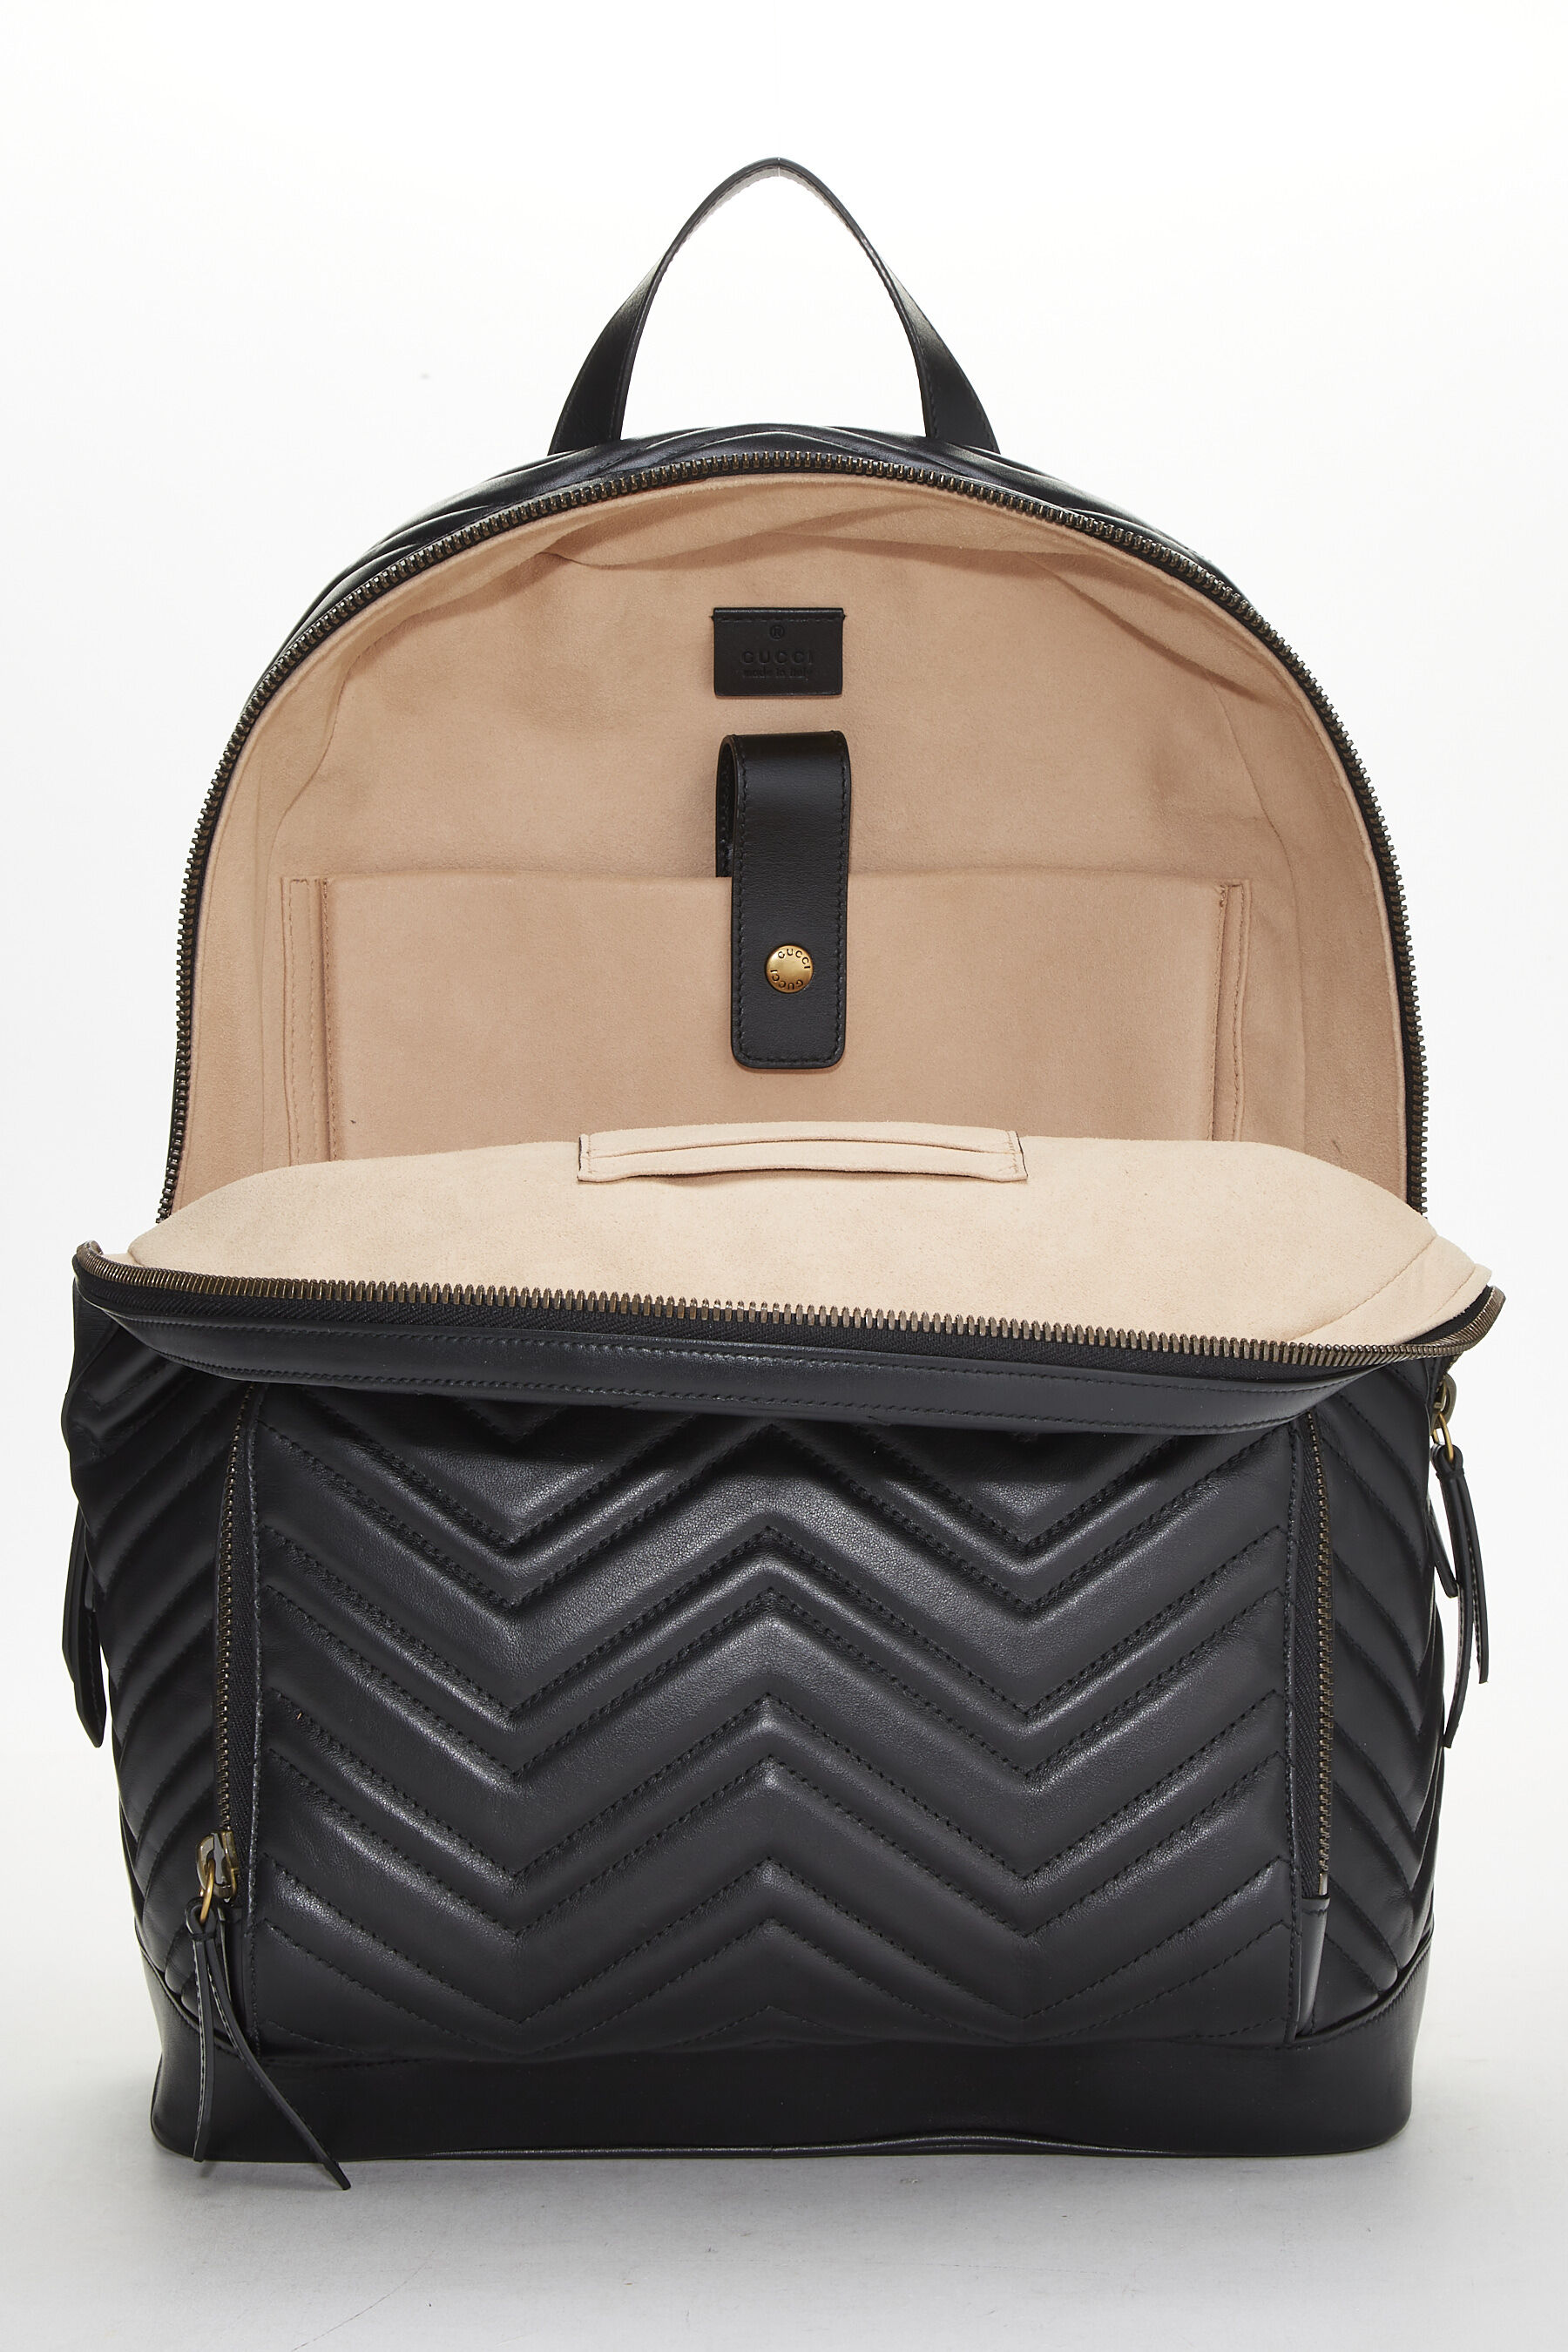 Black Leather GG Marmont Backpack Large